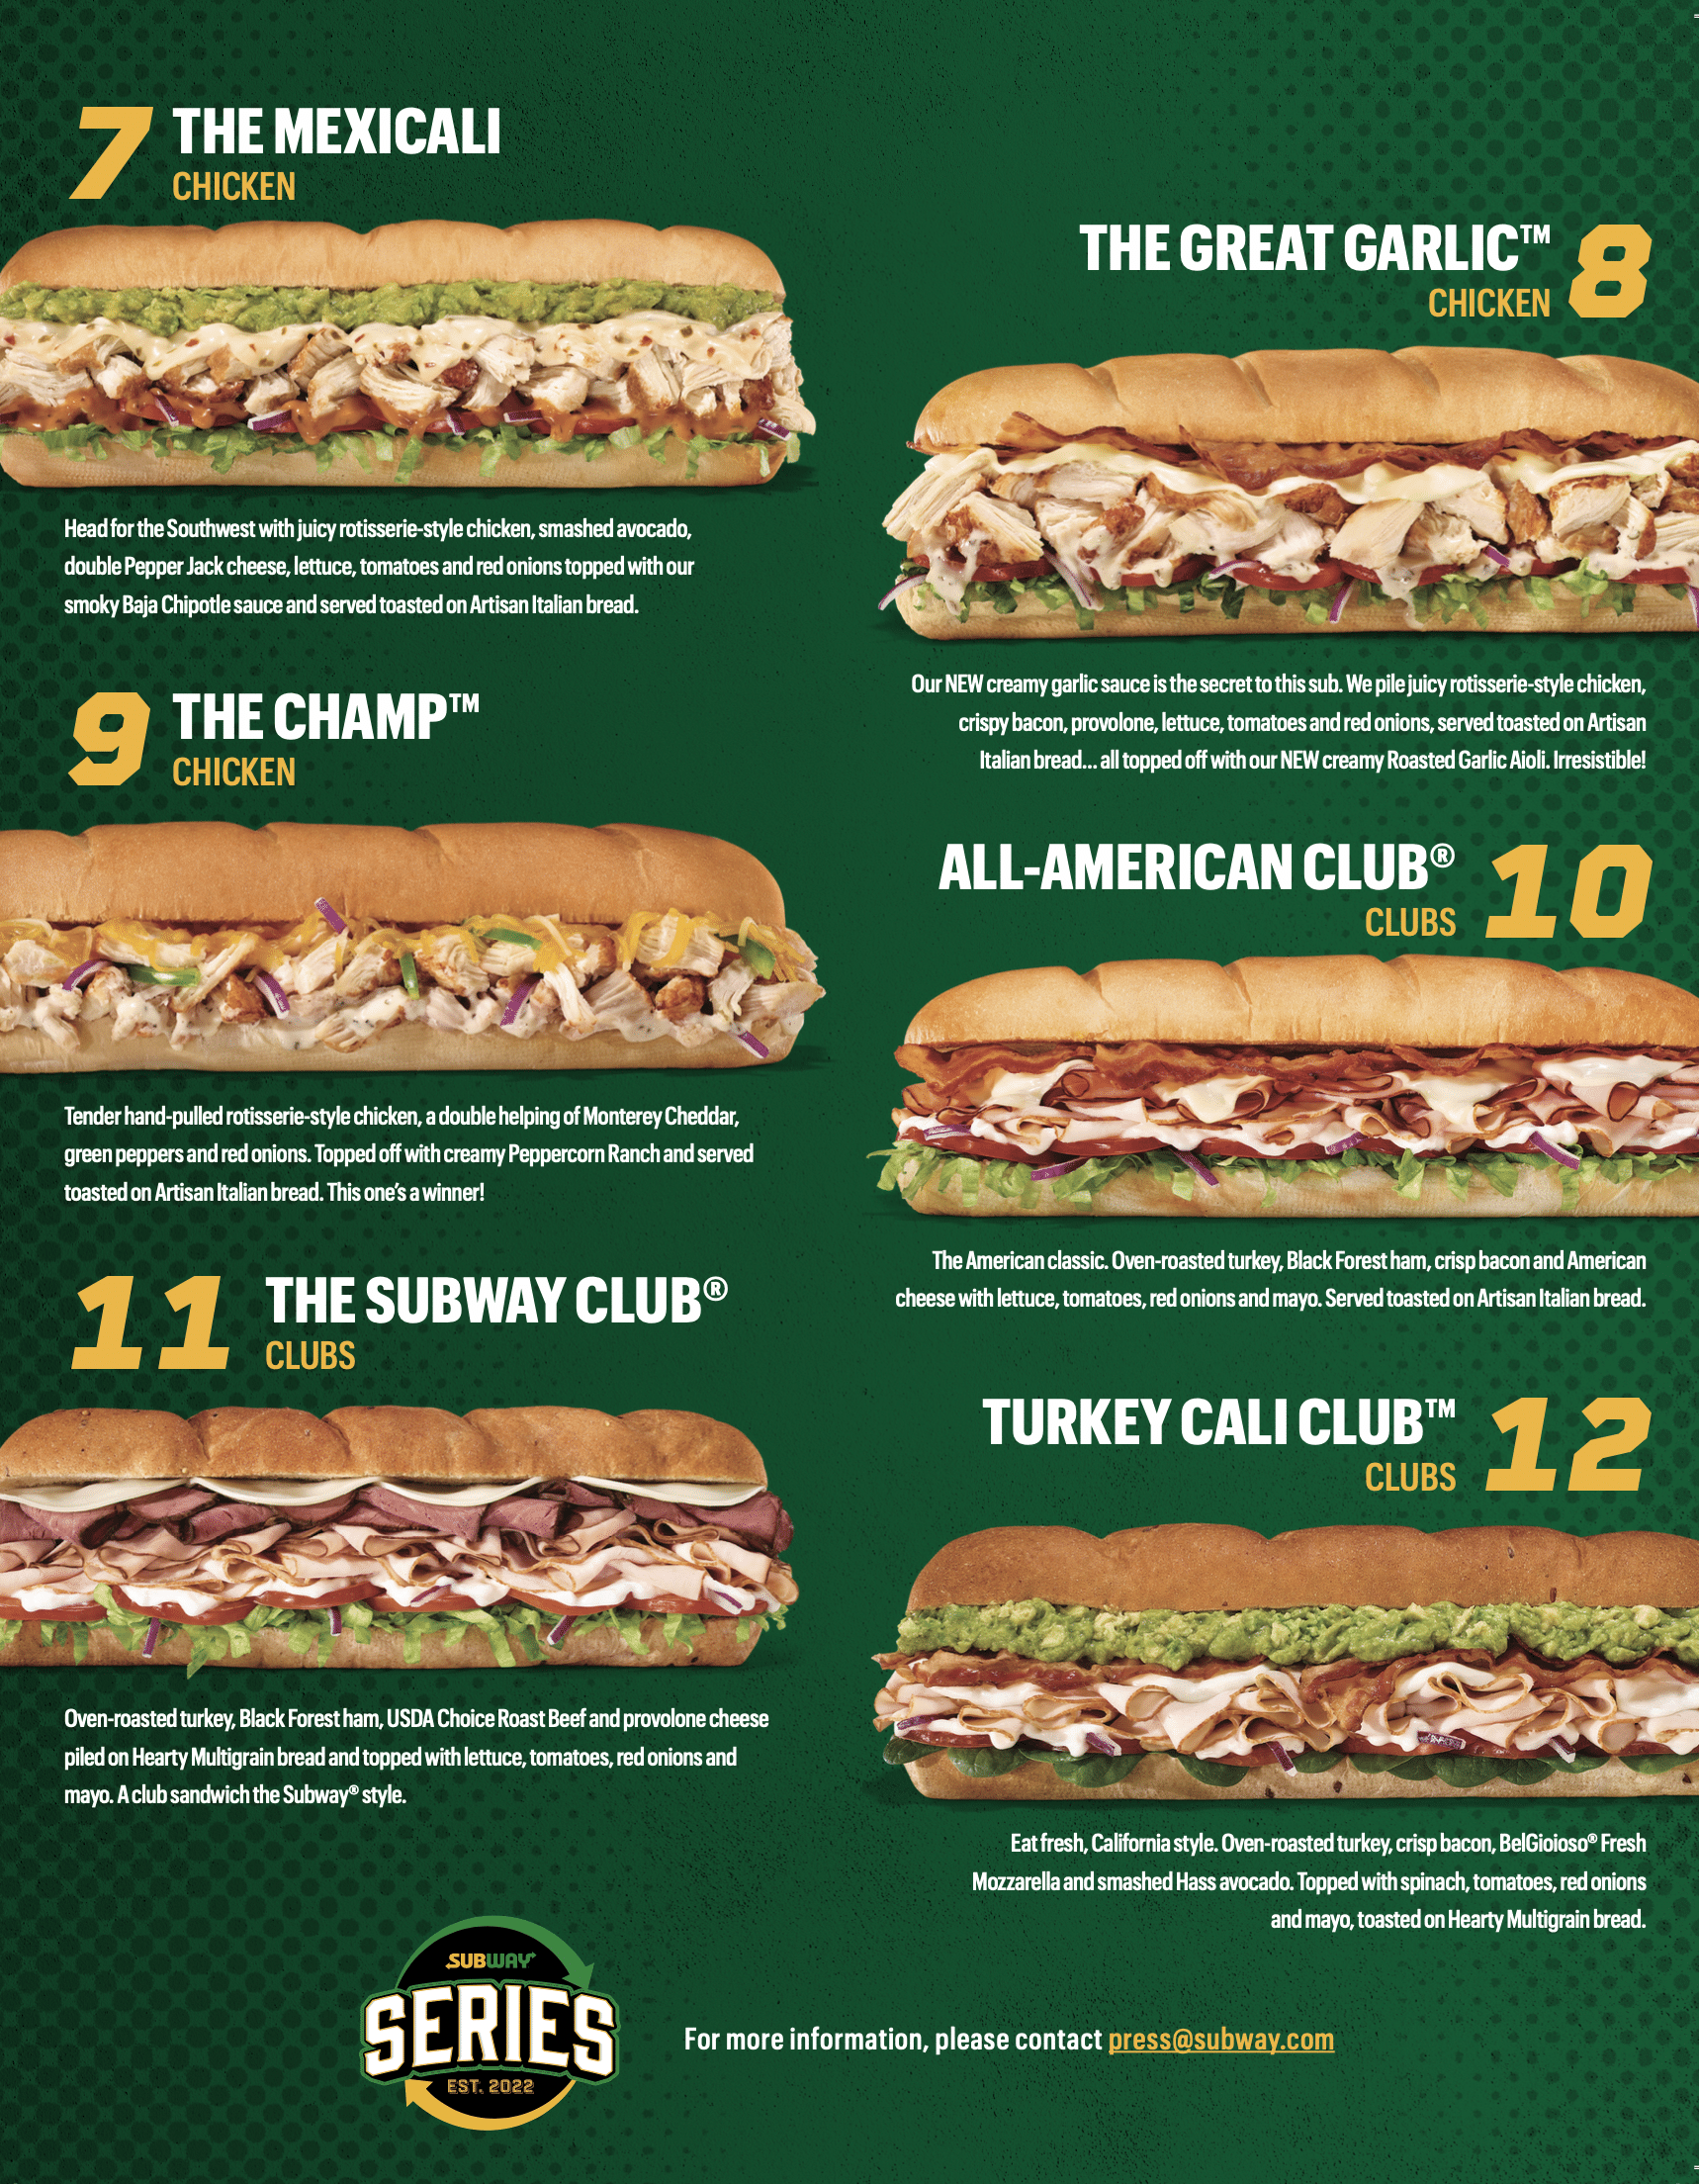 Subway changes up menu with series of sandwiches